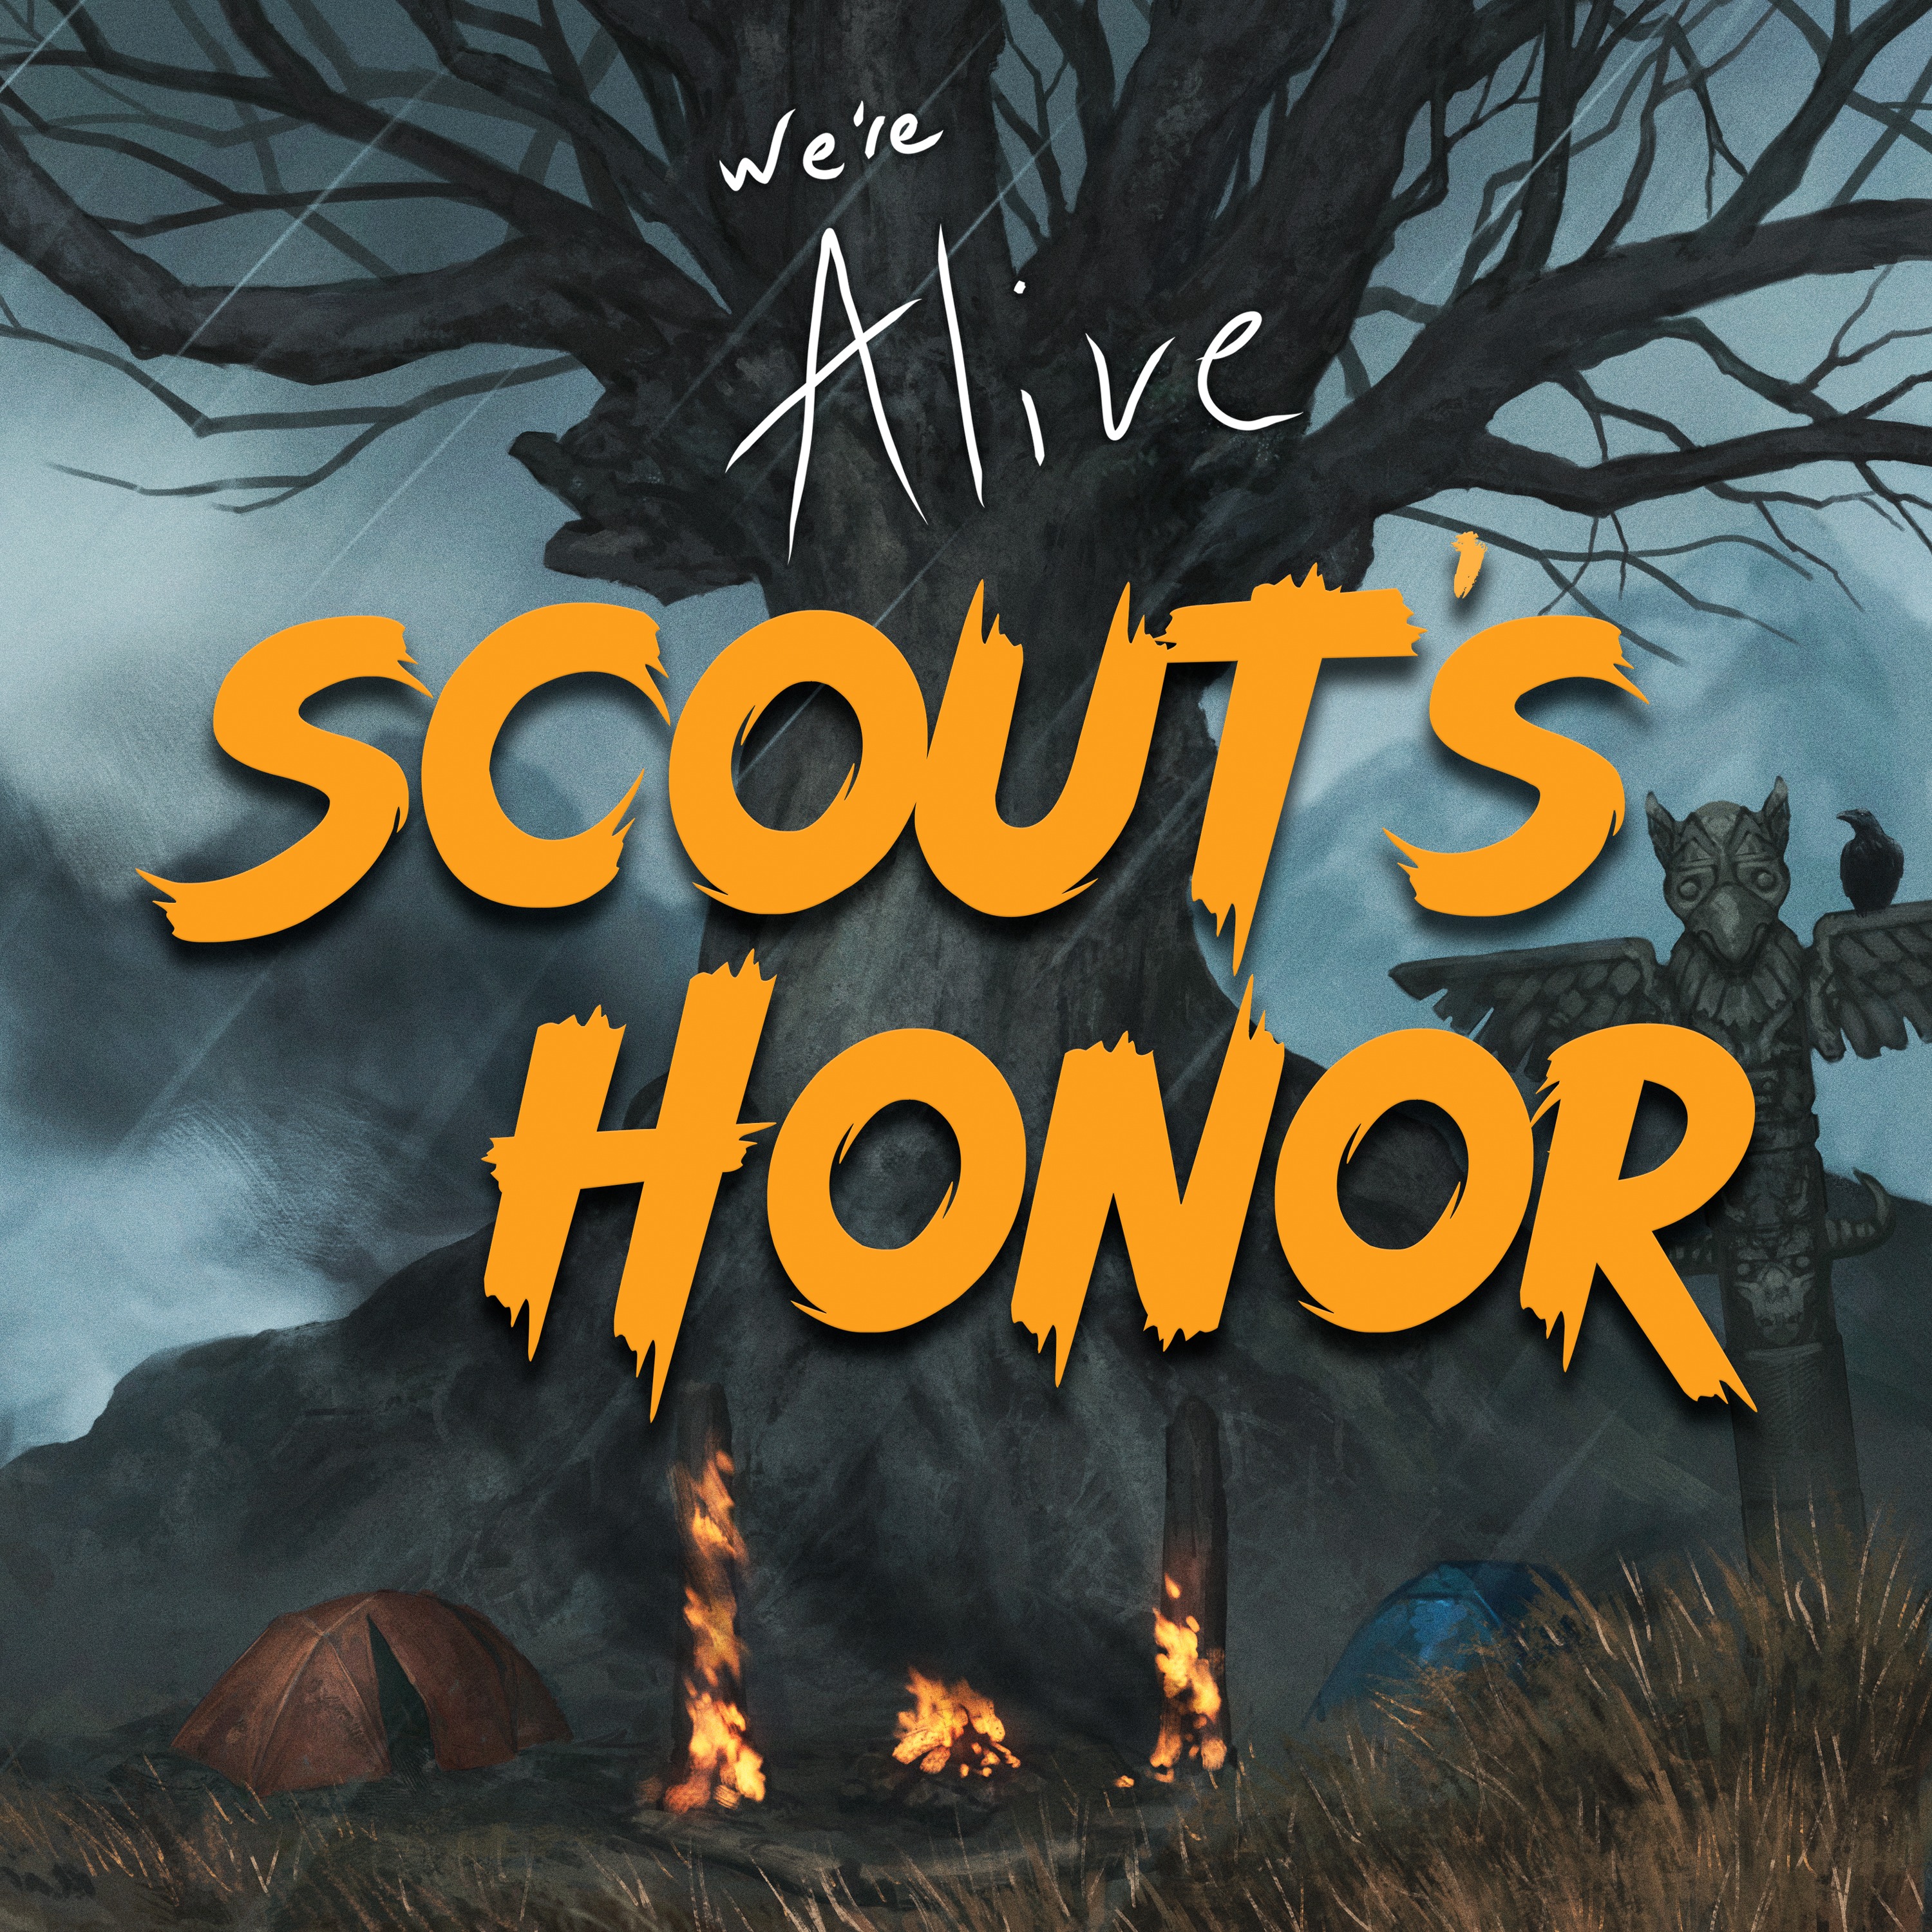 Announcing - We're Alive: Scout's Honor